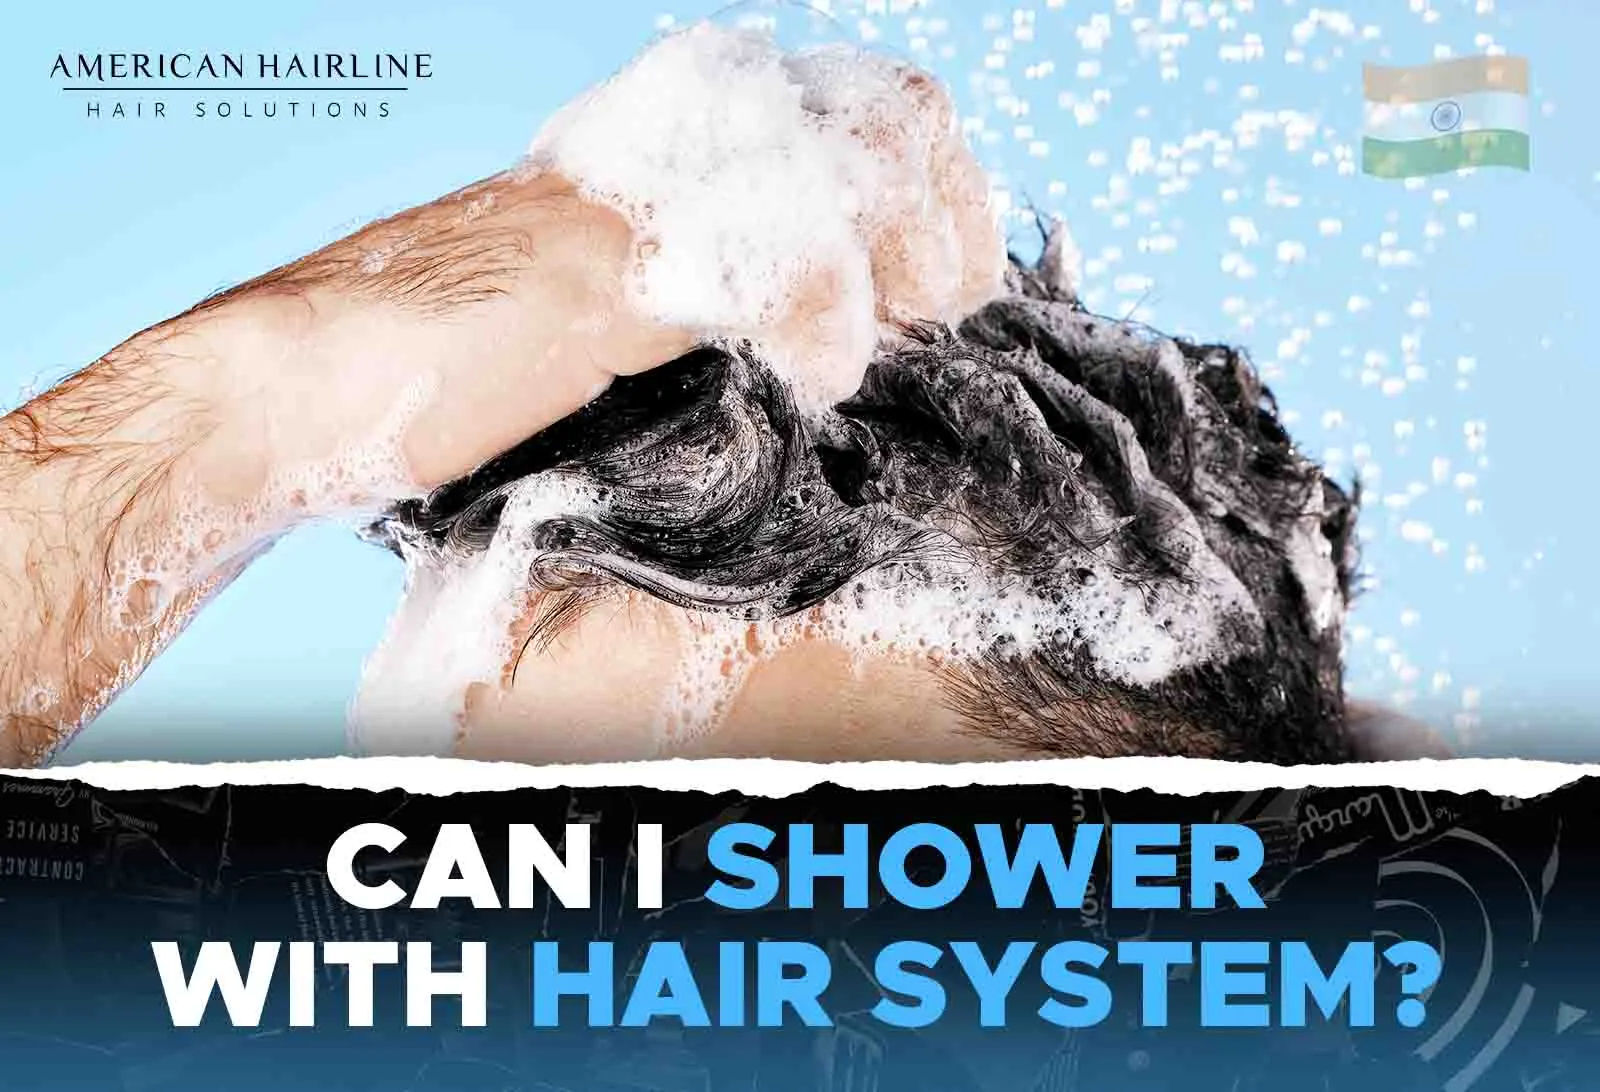 A person showering with a hair system, lathering shampoo on their scalp with the text 'CAN I SHOWER WITH HAIR SYSTEM?' superimposed, emphasizing non-surgical hair replacement maintenance by American Hairline.